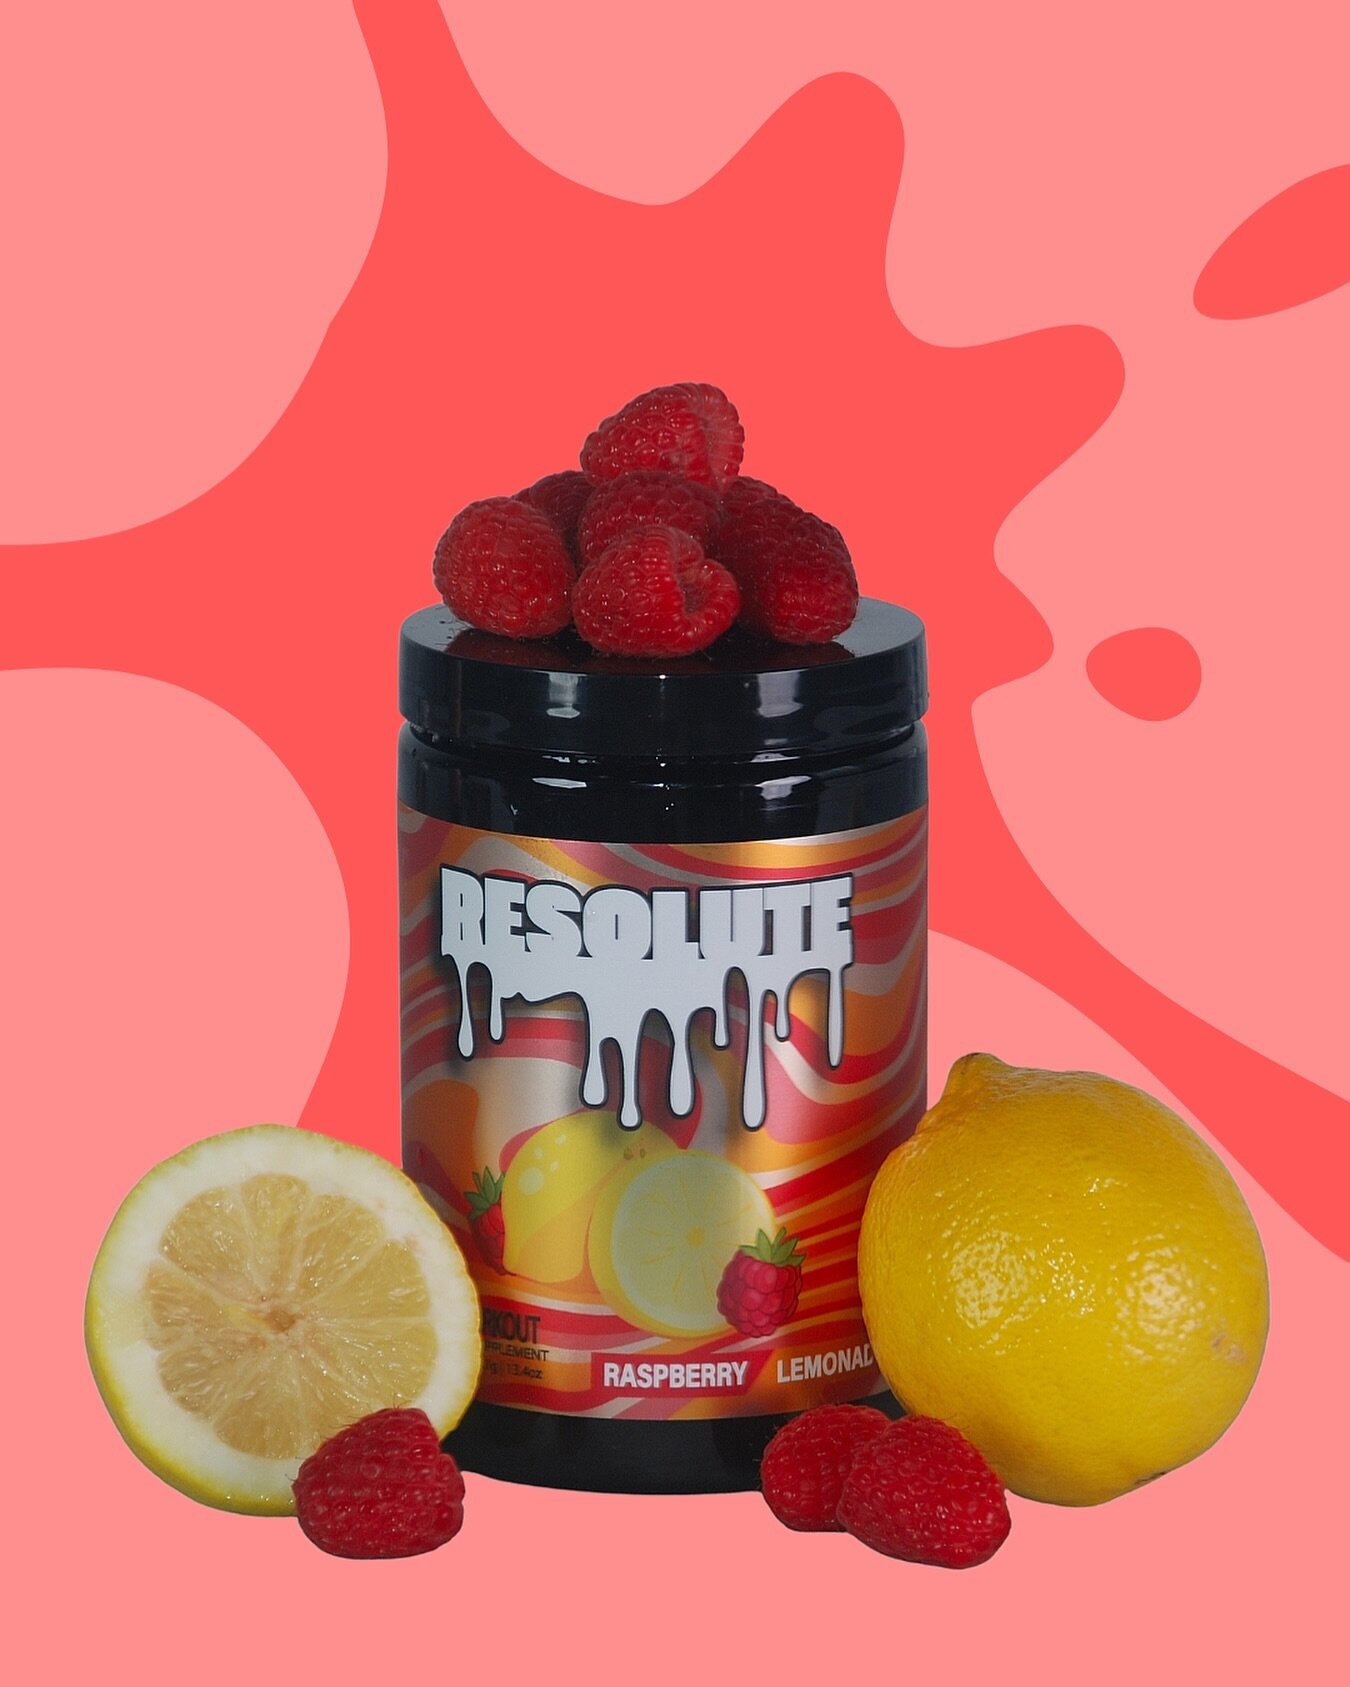 Introducing Raspberry Lemonade 🍋🔥

A tantalizing fusion of sweet raspberries and zesty lemonade flavor, designed to elevate your performance. Refresh your routine and crush your fitness goals with every scoop! 

#resolute #preworkout #athletes #wor